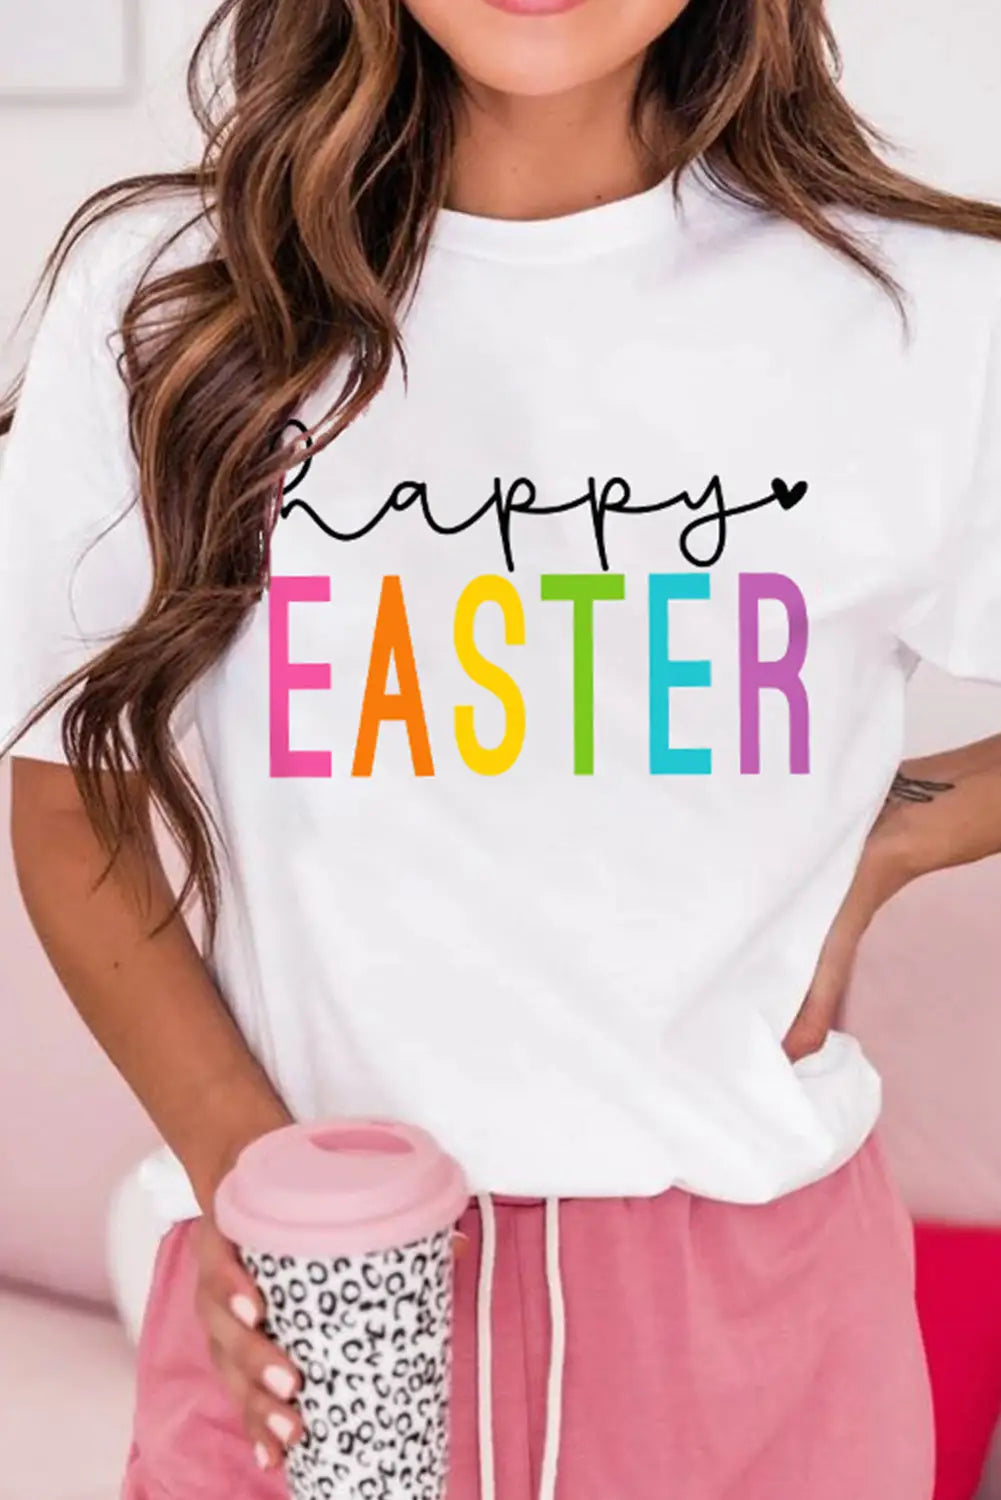 White happy easter round neck graphic tee - s 62% polyester + 32% cotton + 6% elastane t - shirts